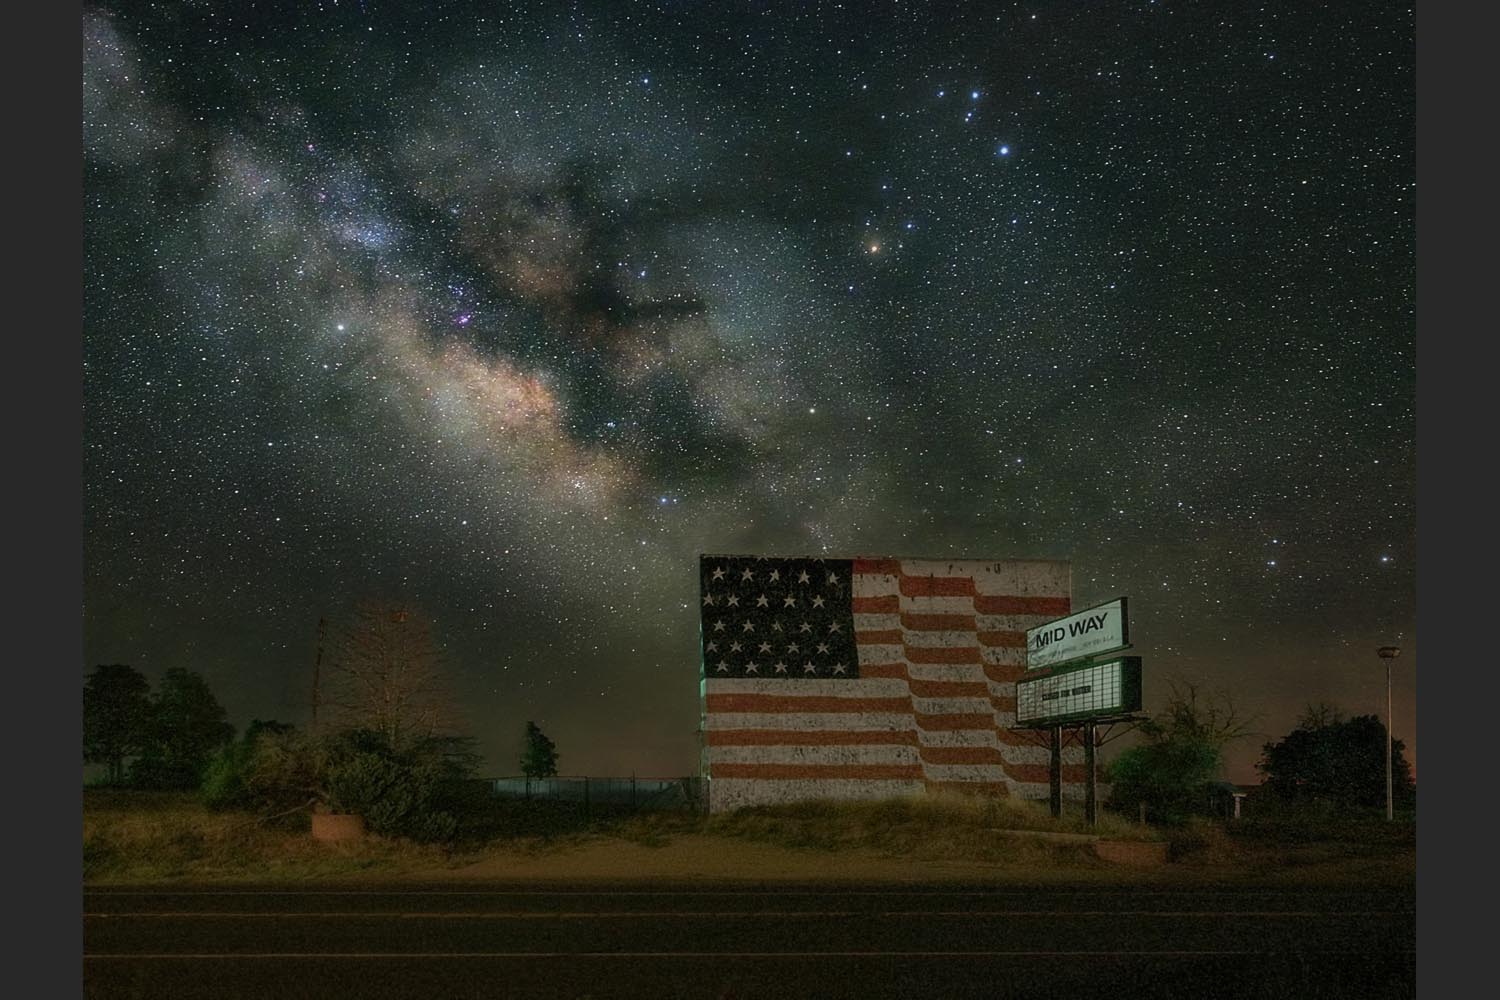 James Clinich:  Stars over Stars and Stripes - Quitaque, Texas